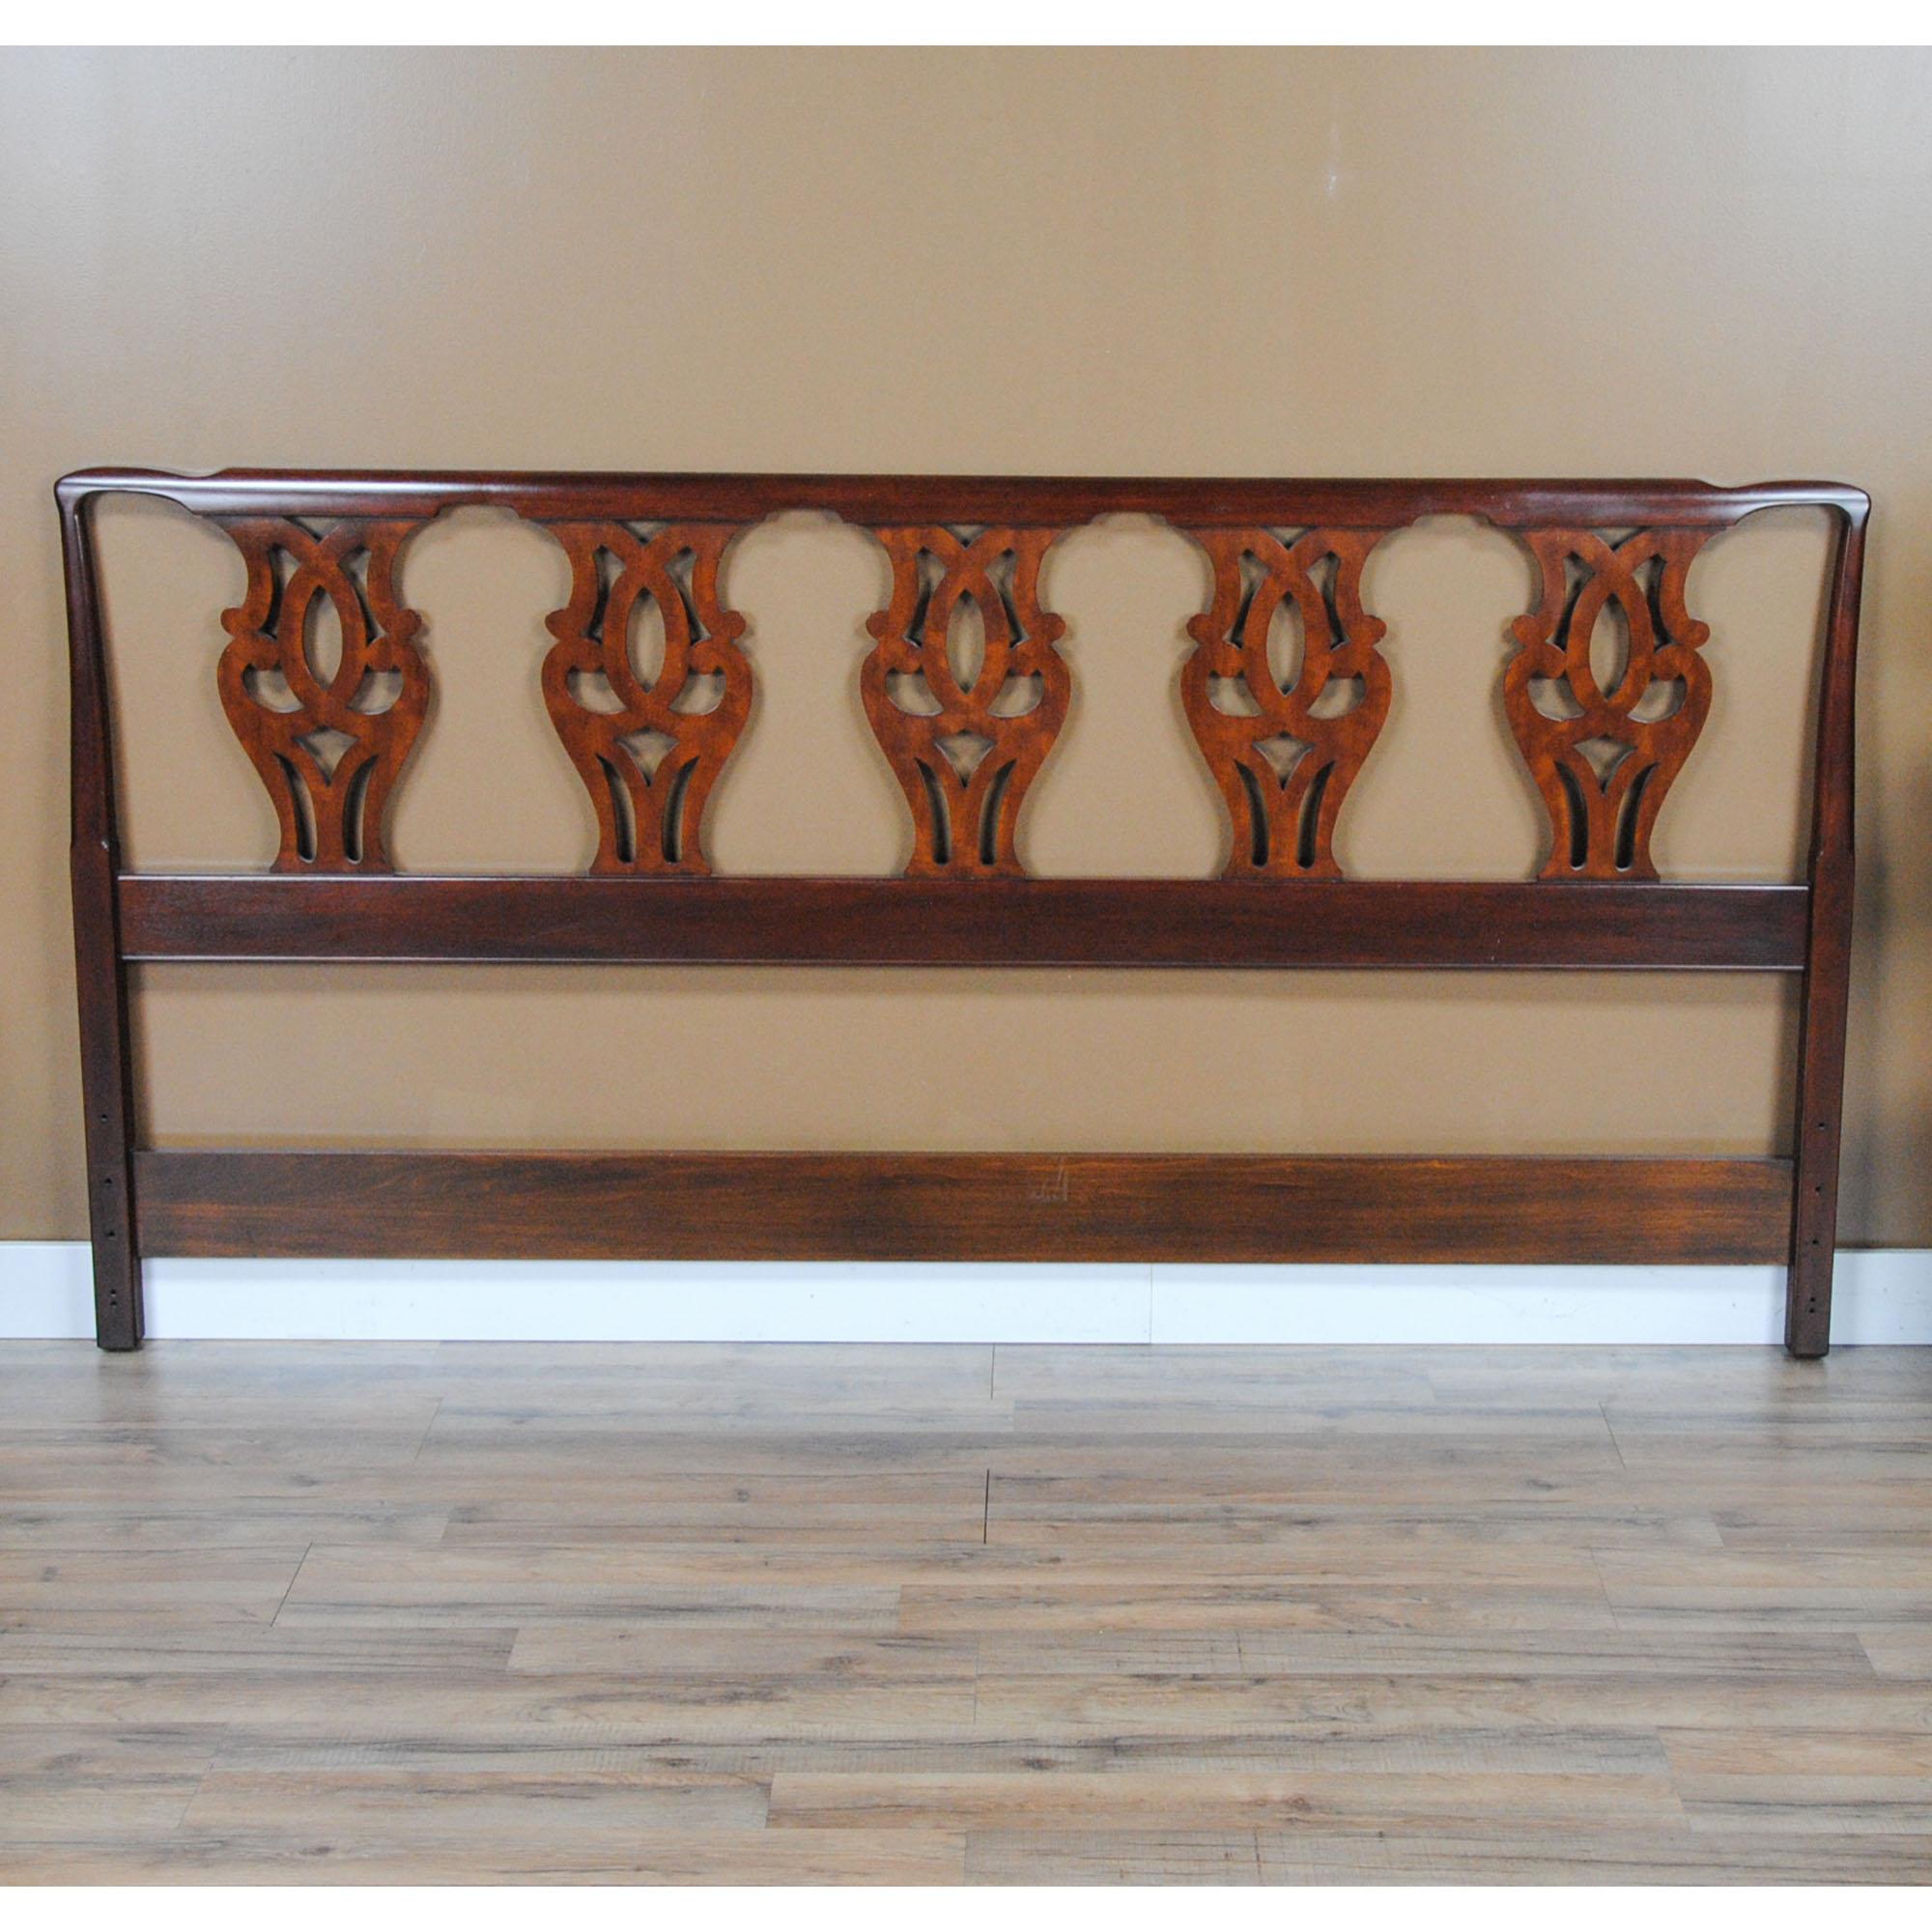 This Vintage Henkel Harris King Size Headboard was manufactured using solid mahogany on all exposed surfaces. The attention to detail and expert craftsmanship is apparent throughout the headboard. Every detail on this item is as crisp as the day it